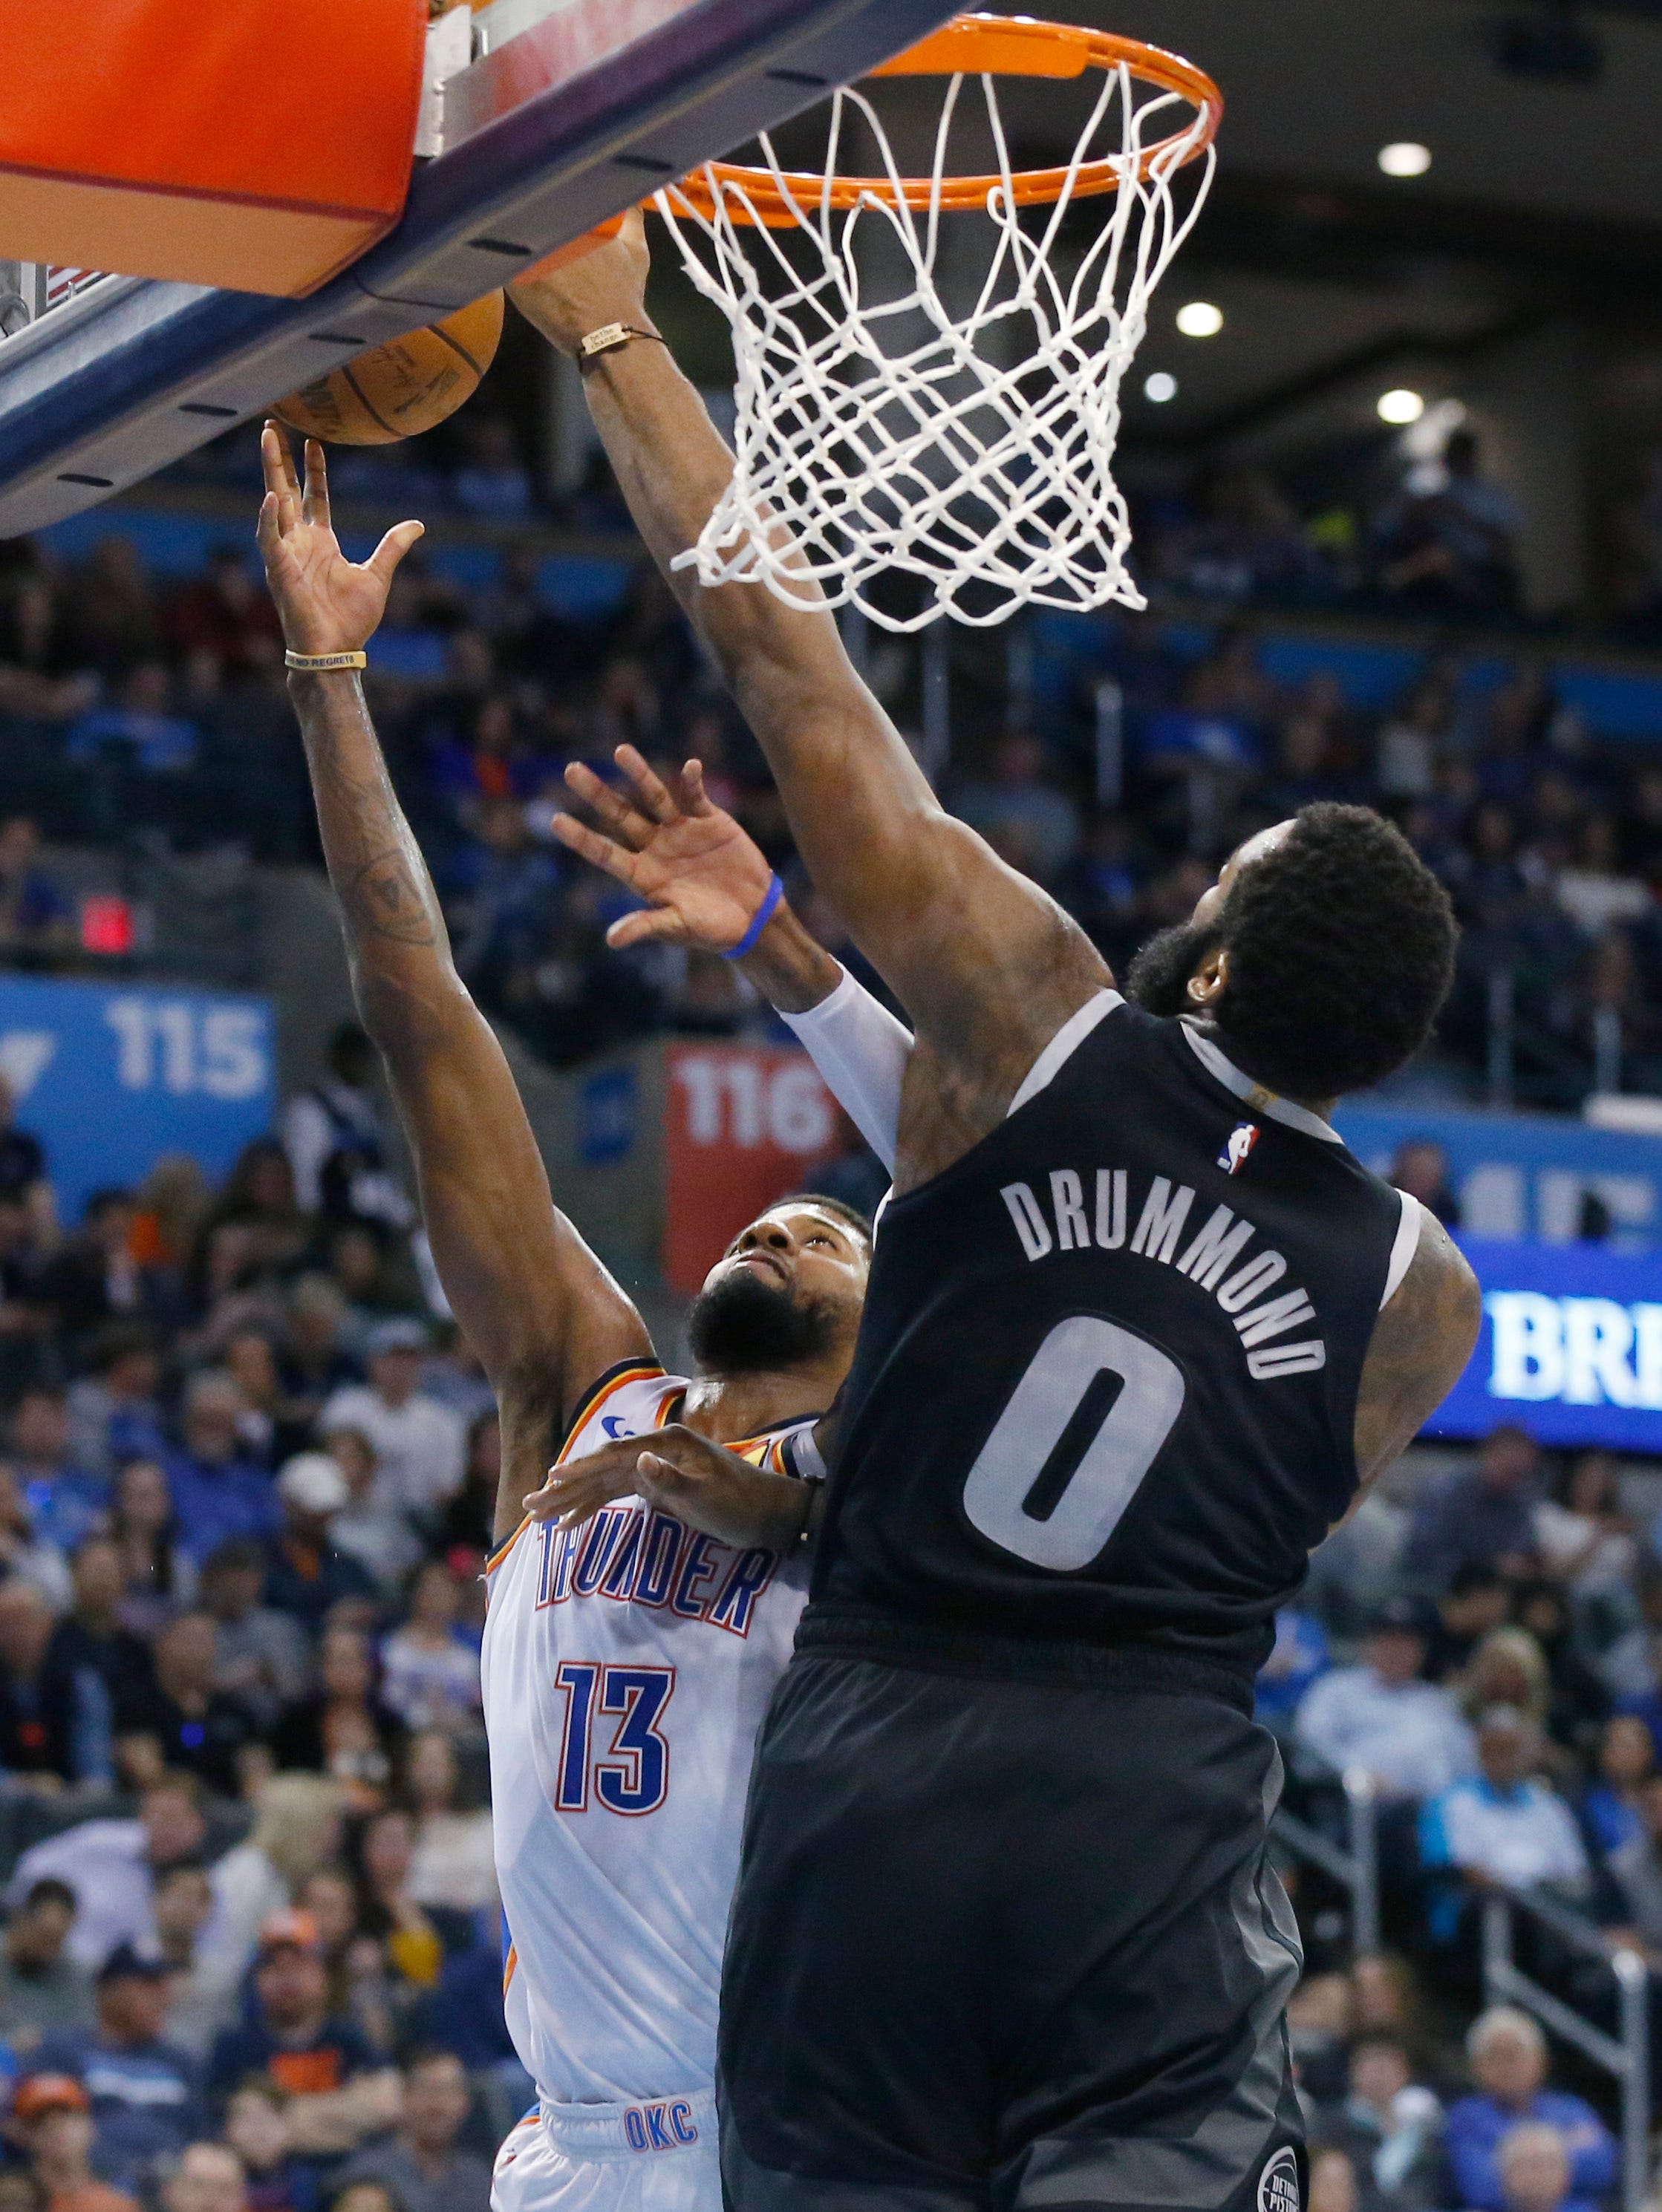 Oklahoma City Thunder forward Paul George (13) shoots as Detroit Pistons center Andre Drummond (0) defends during the second half.